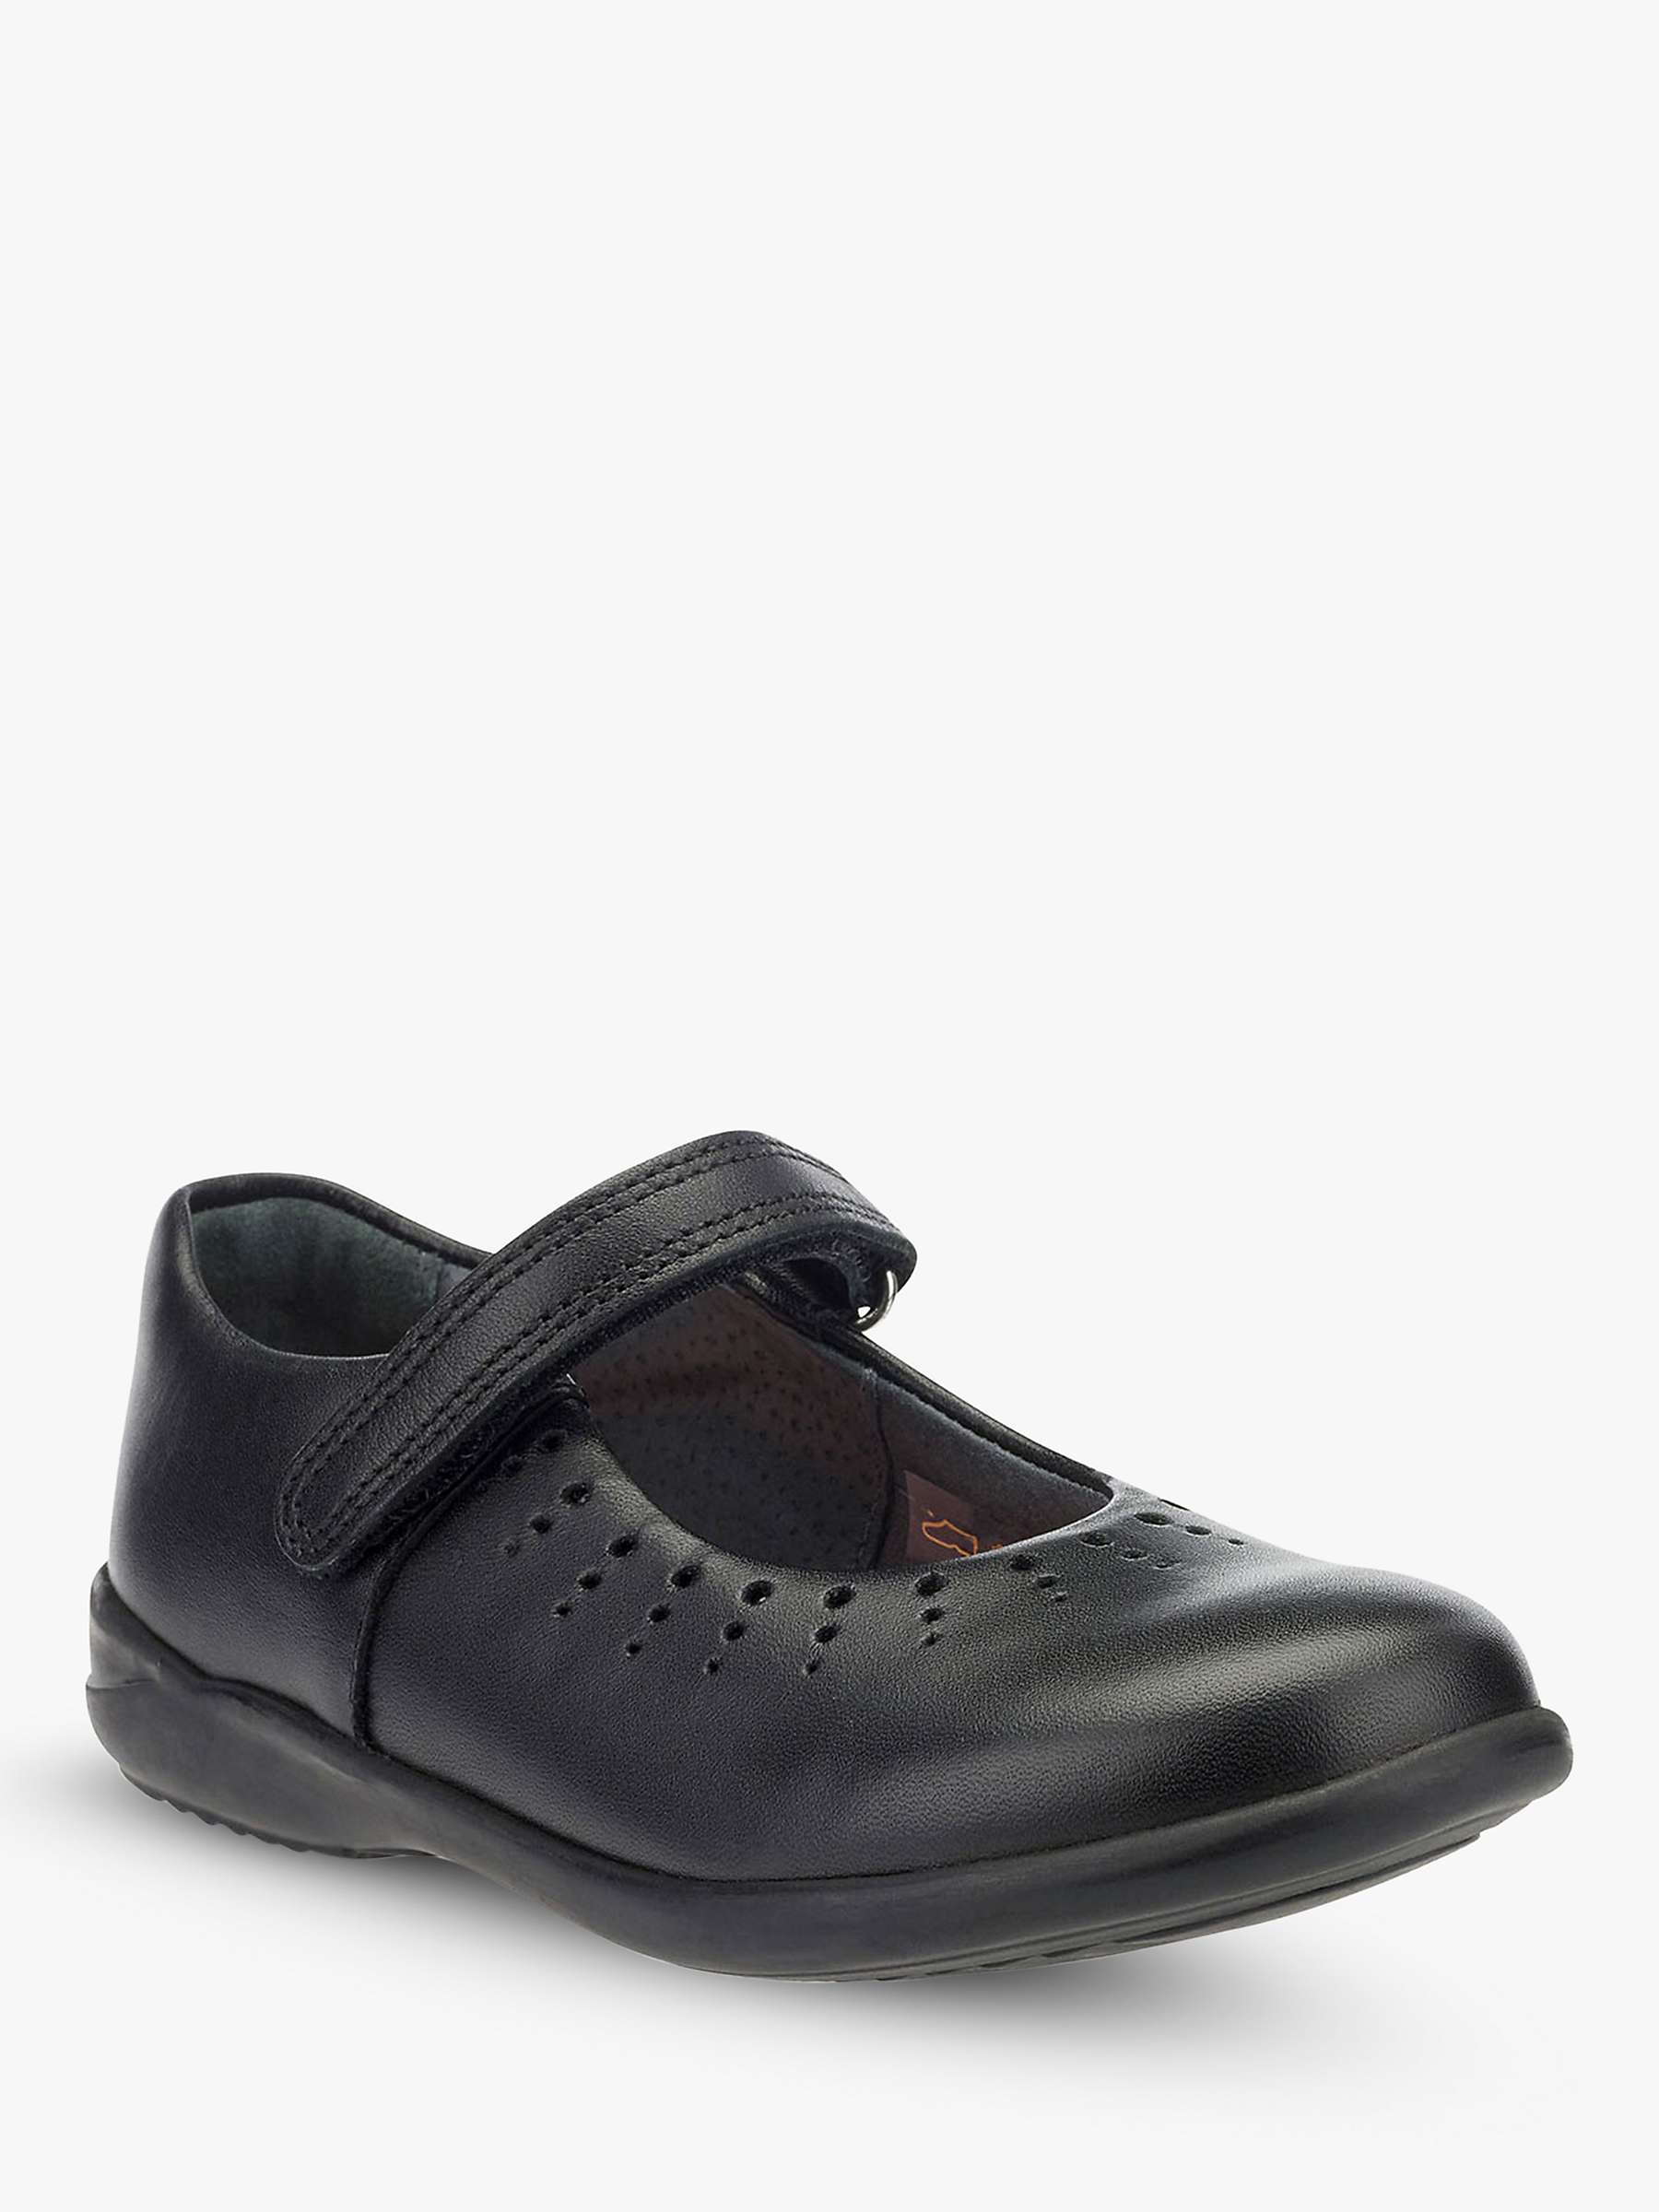 Buy Start-Rite Kids' Mary Jane Leather Shoes, Black Online at johnlewis.com